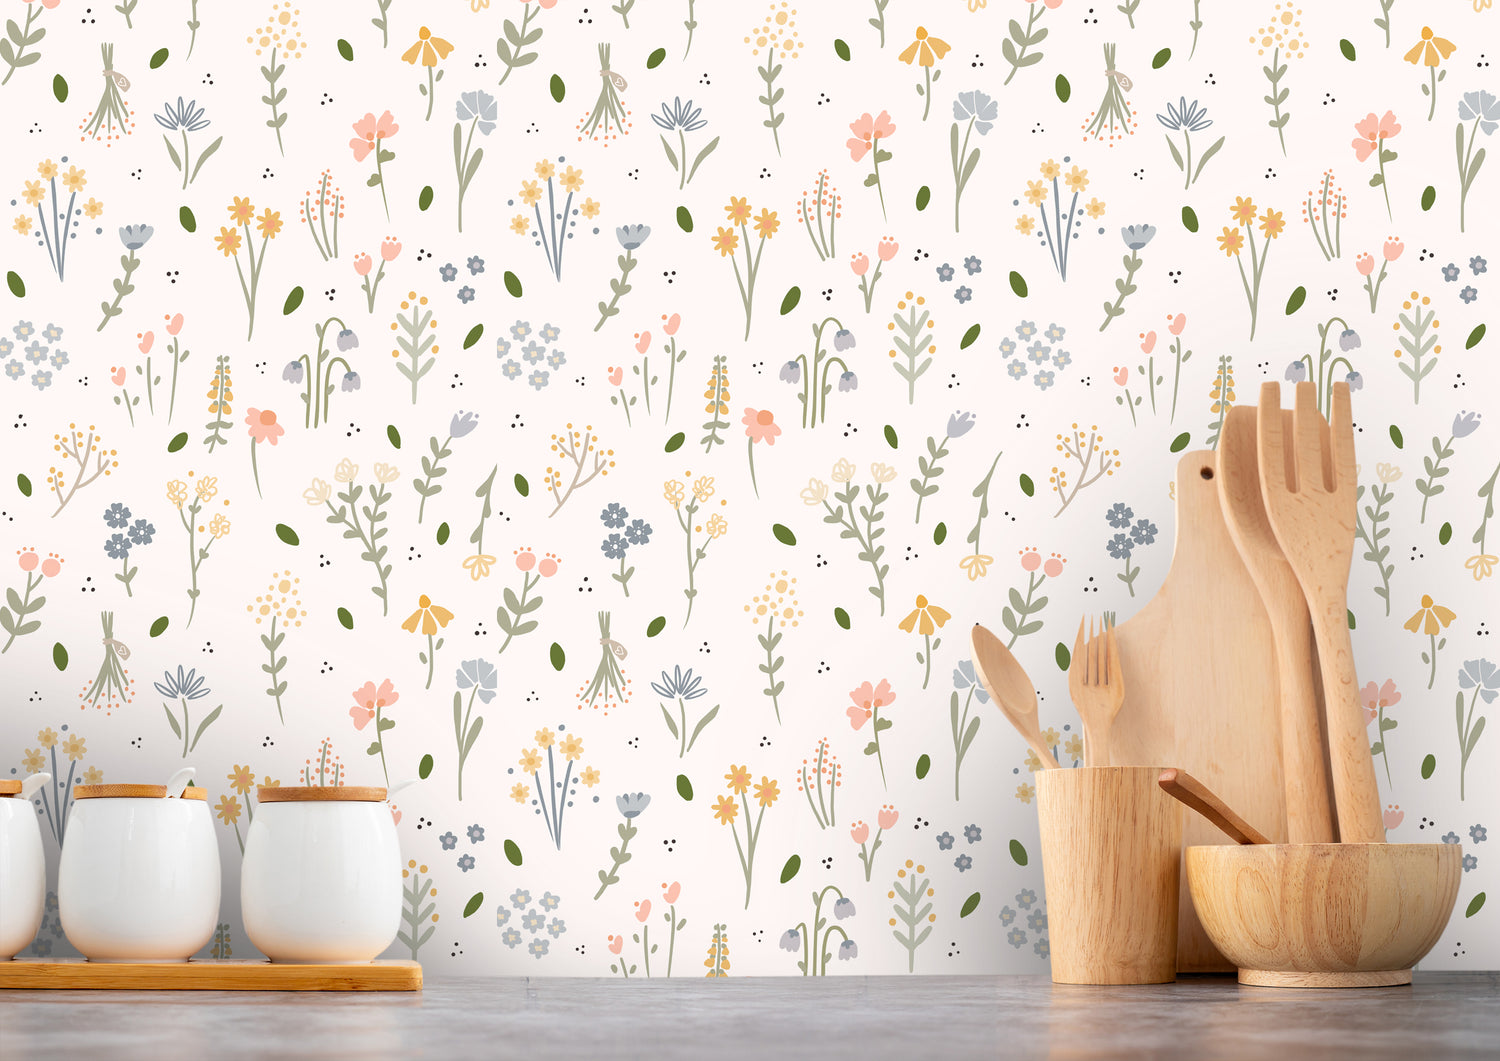 wildflower wallpaper illustrated by Kathrin Legg. A charming, timeless pattern that is available through Spoonflower and Happywall.